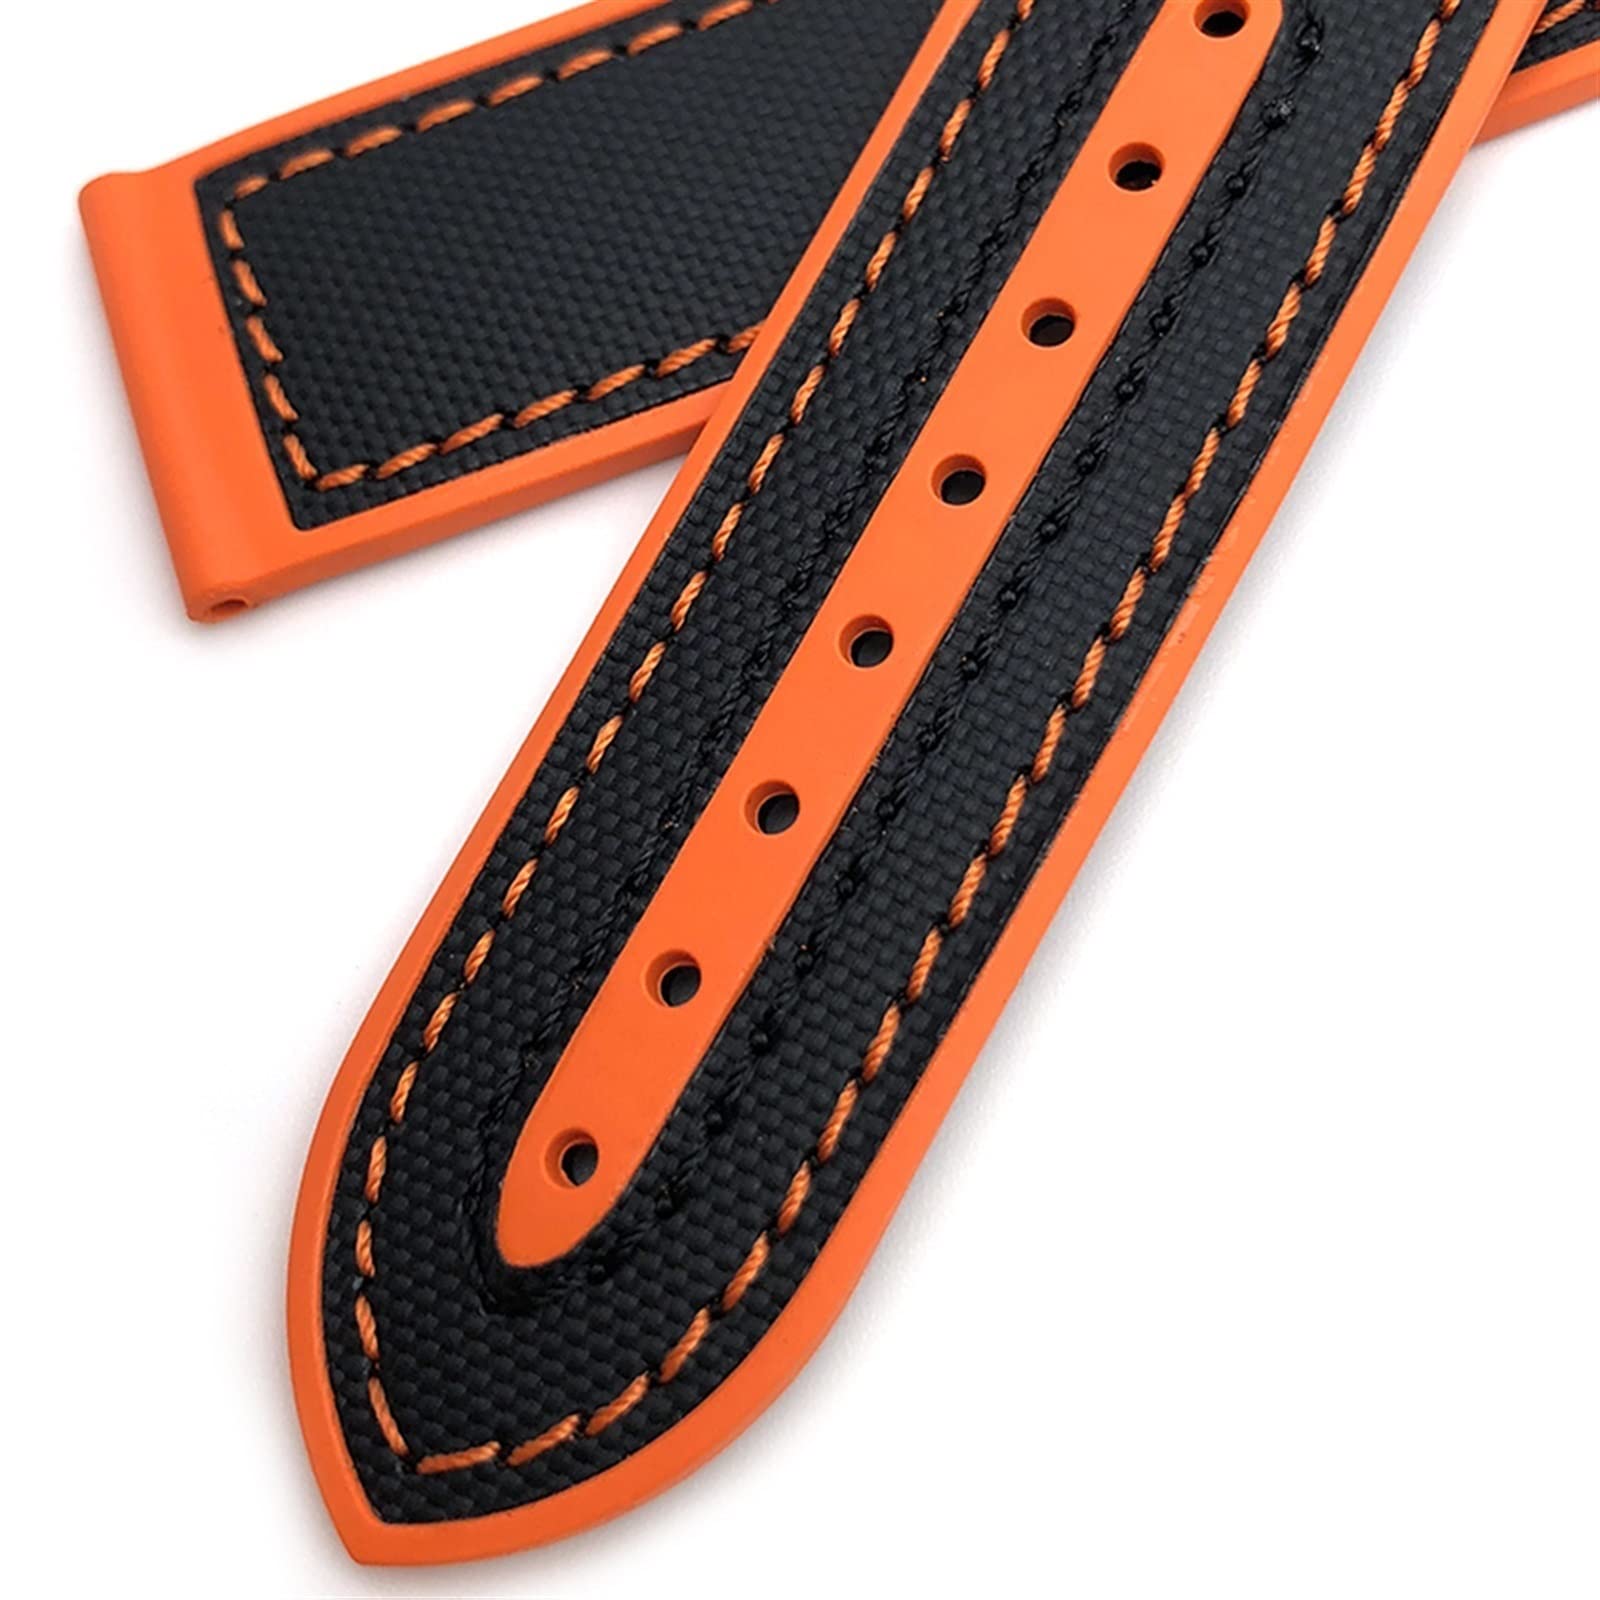 HAODEE 19mm 20mm Nylon Rubber Watchband 21mm 22mm for Omega Seamaster 300 AT150 Speedmaster 8900 PlanetOcean Seiko Leather Strap (Color : Blue Nylon Orange, Size : 21mm)